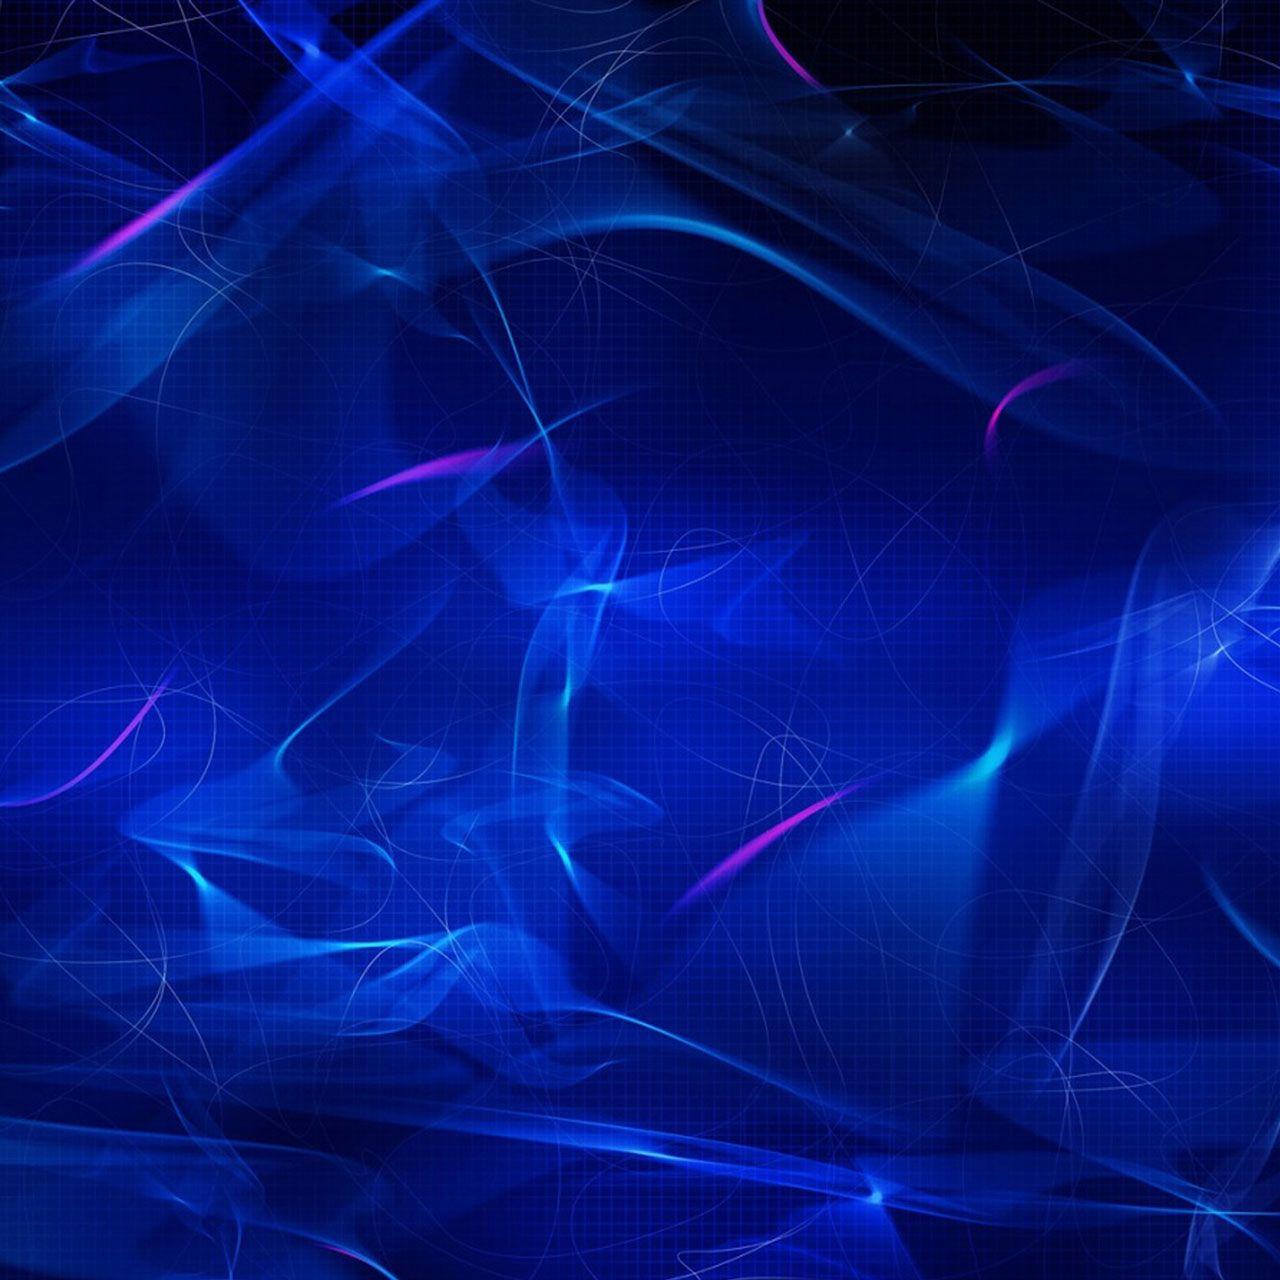 Abstract Blue Galaxy Note 2 wallpaper